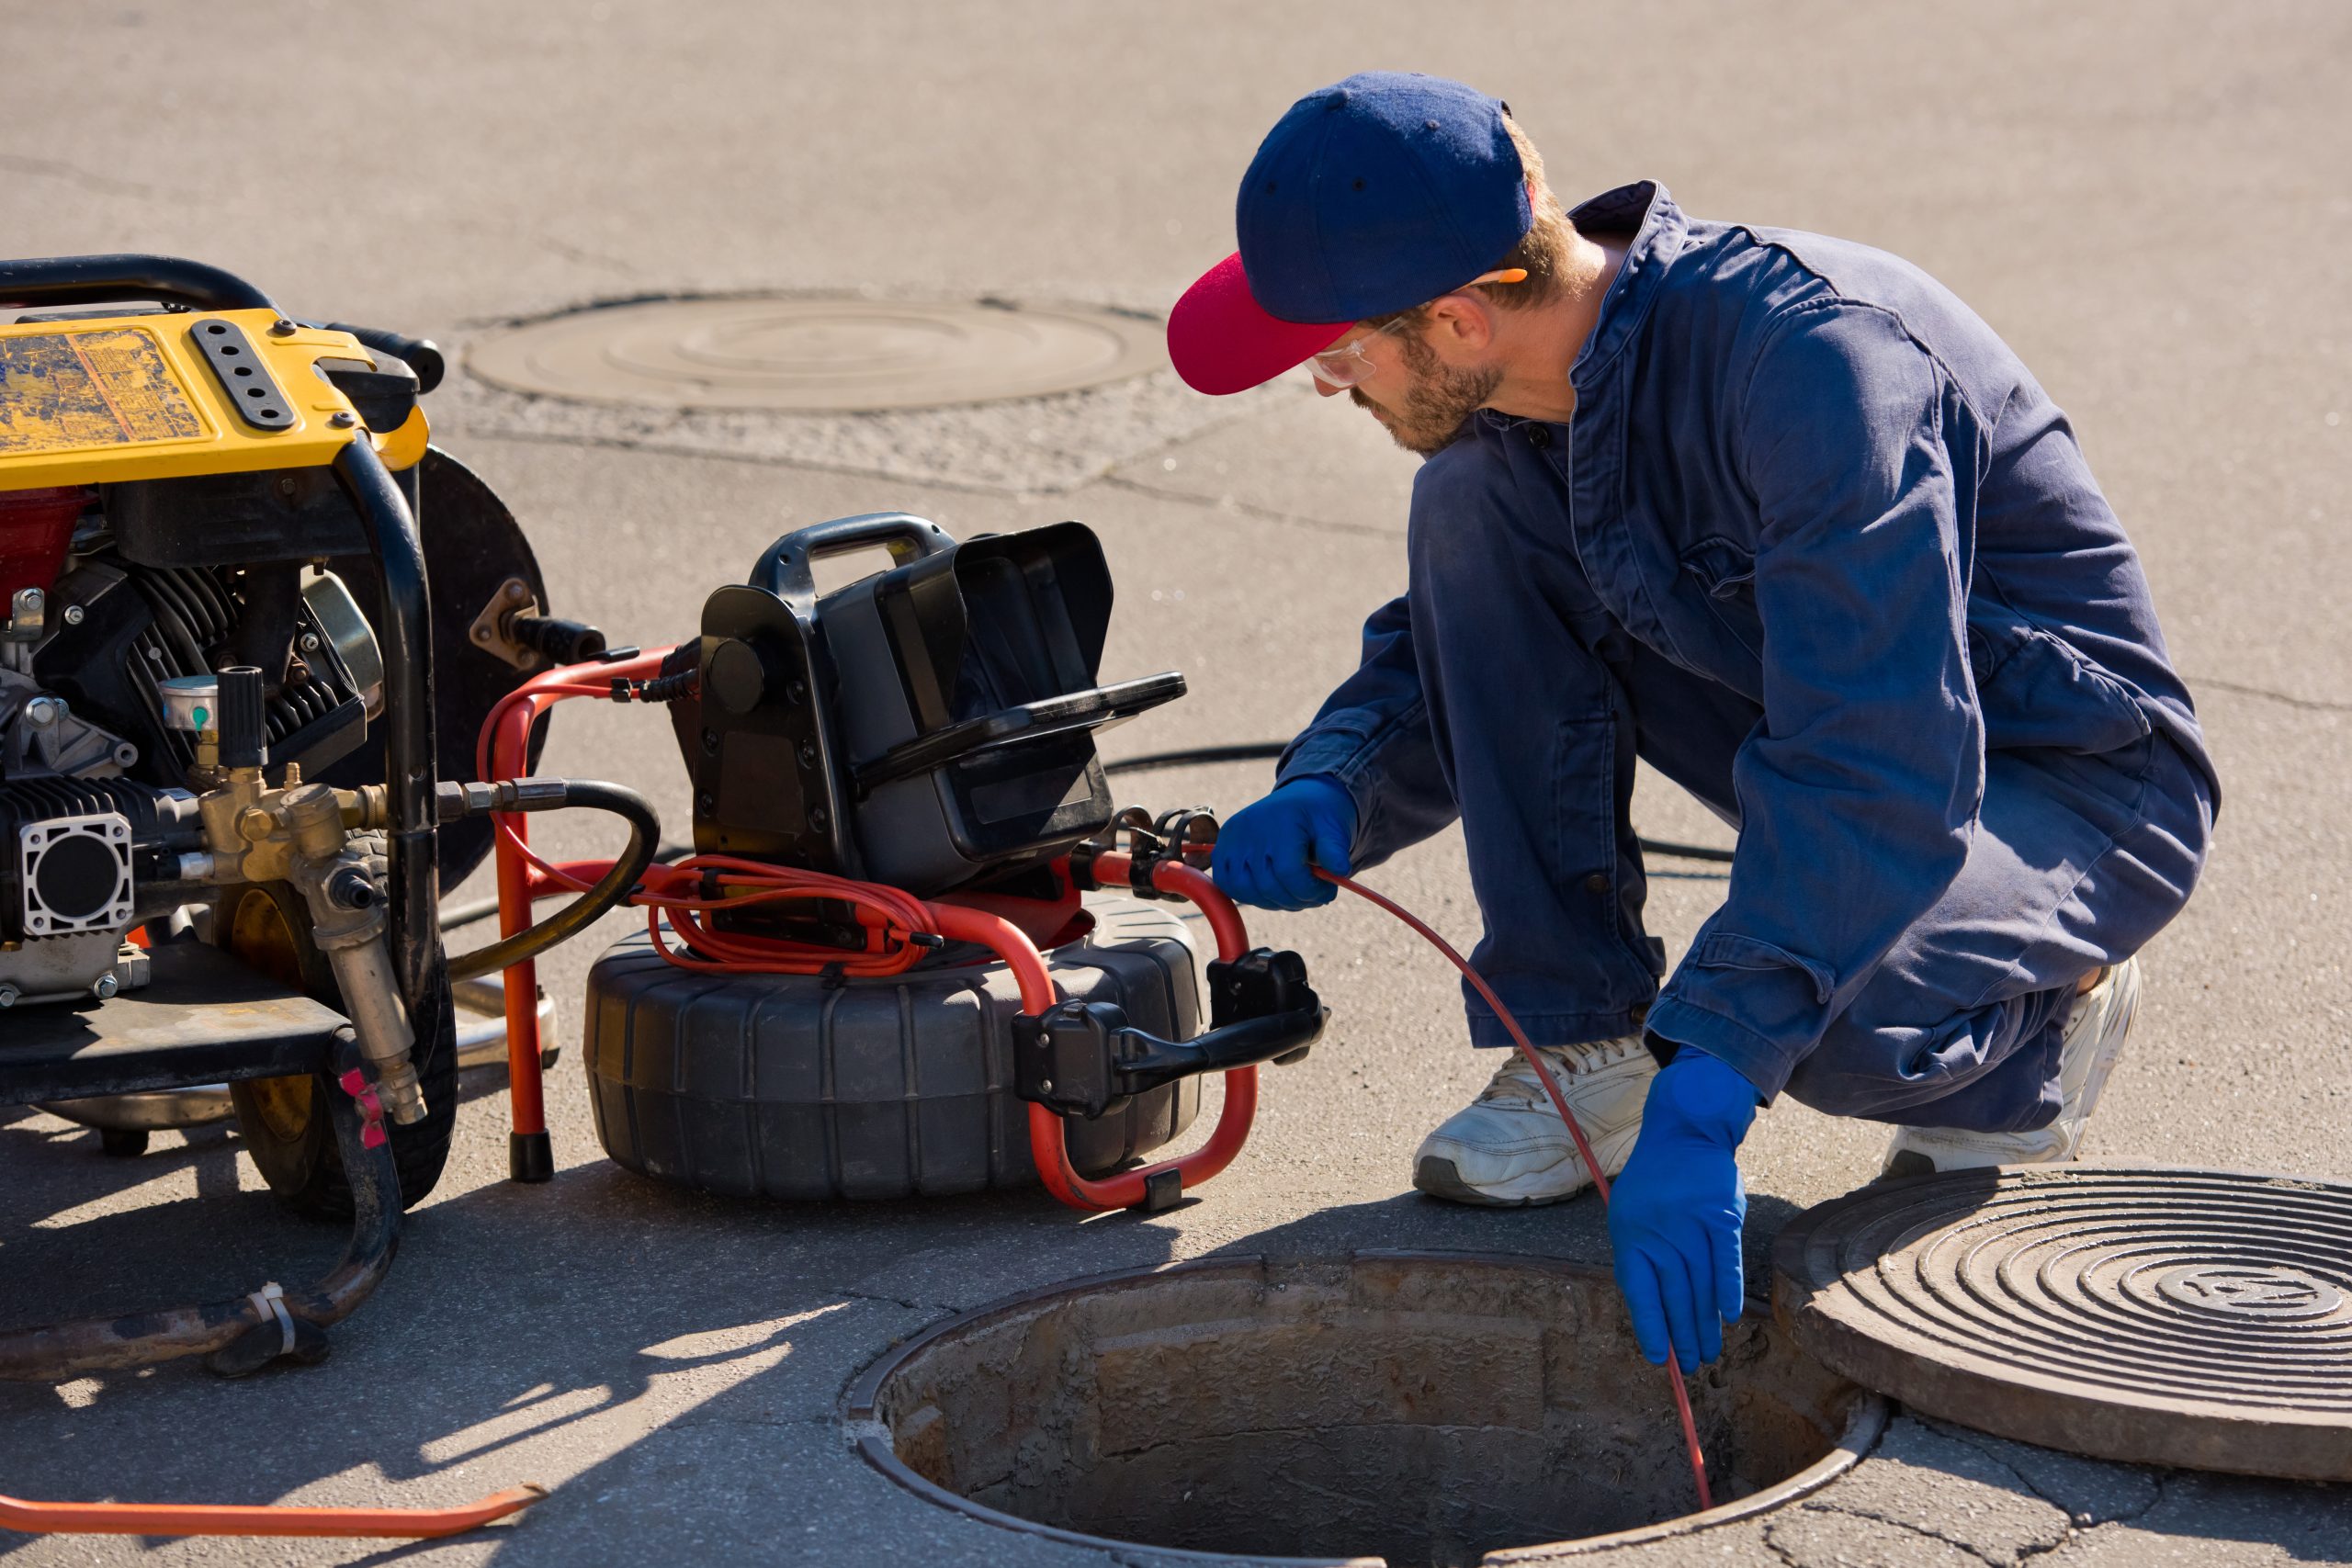 San Diego Drain Cleaning, drain replacement and installation, commercial plumbing services